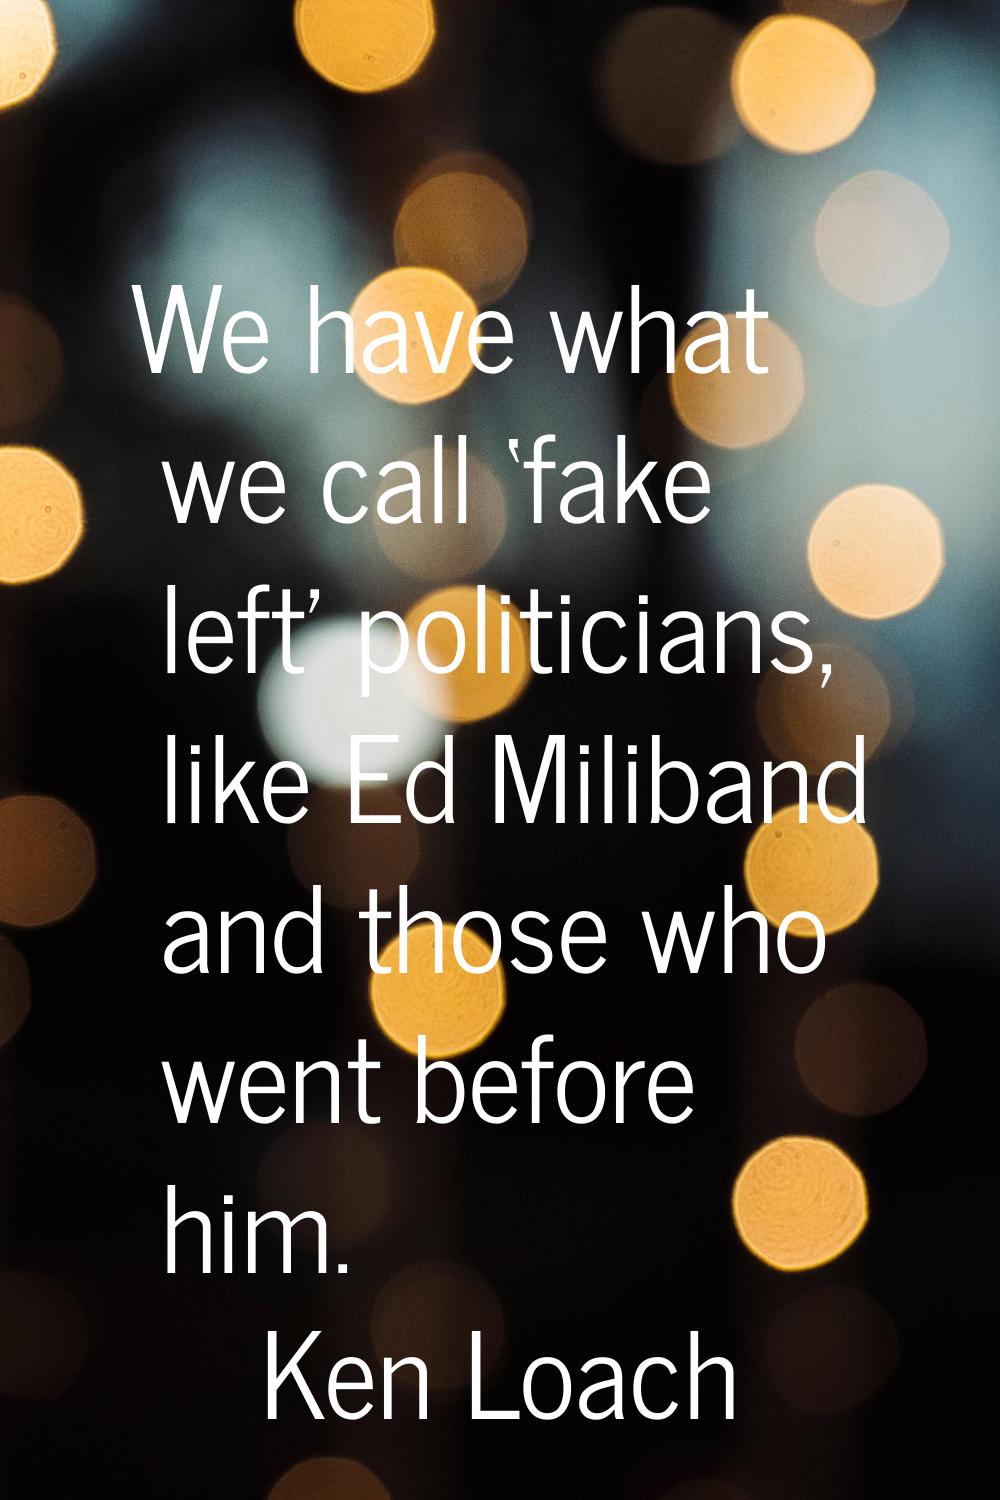 We have what we call ‘fake left' politicians, like Ed Miliband and those who went before him.